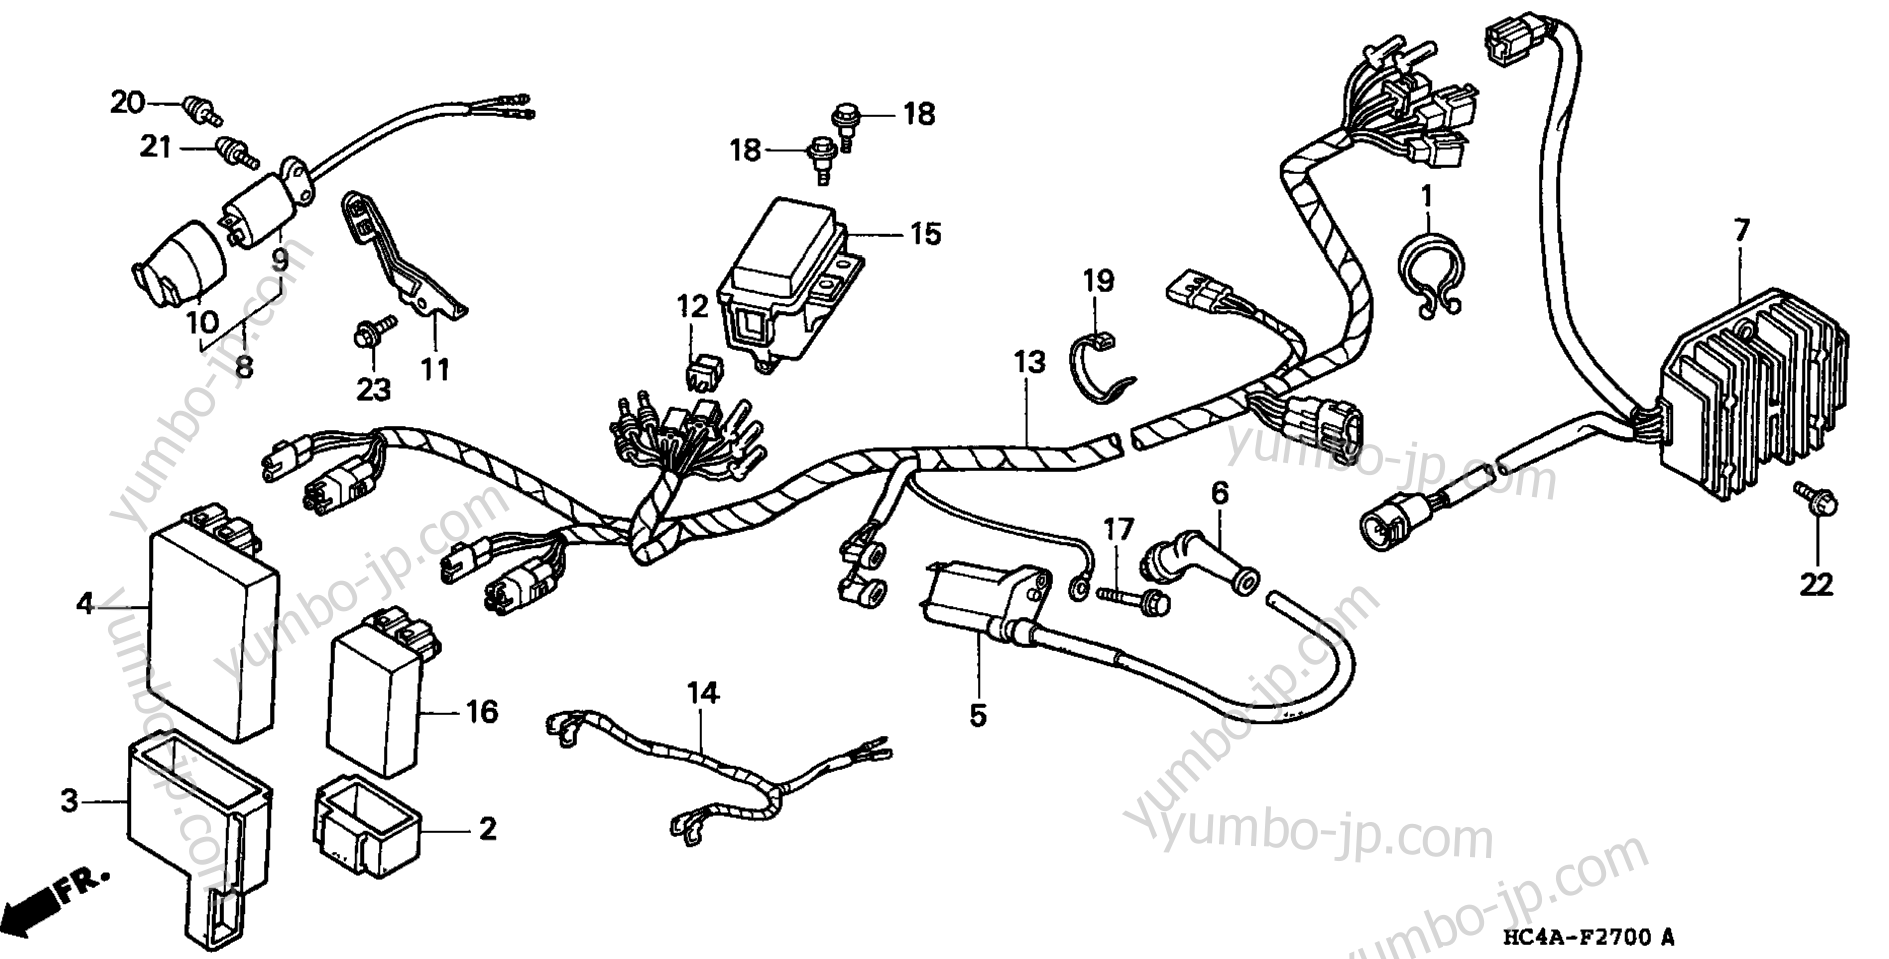 WIRE HARNESS for ATVs HONDA TRX300FW AN 1994 year